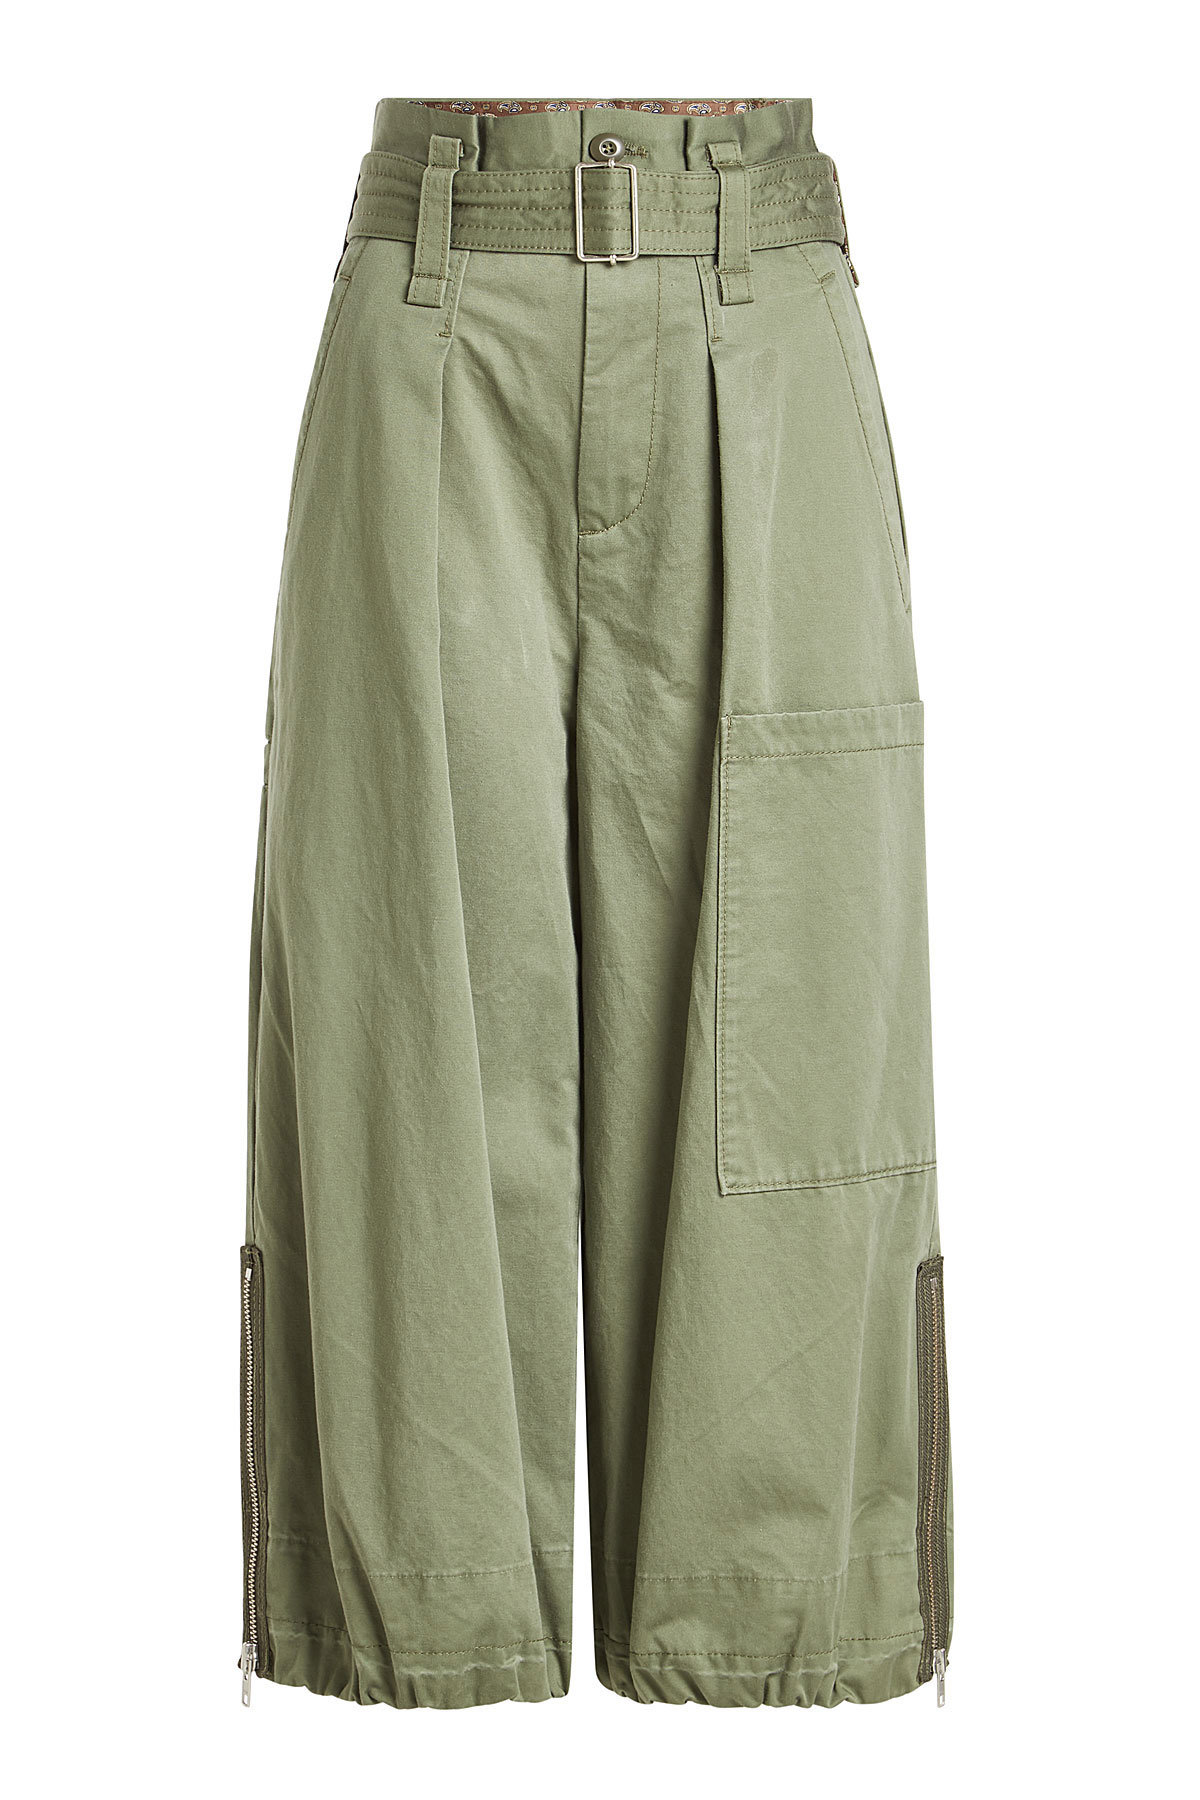 Marc Jacobs - Cargo Culottes